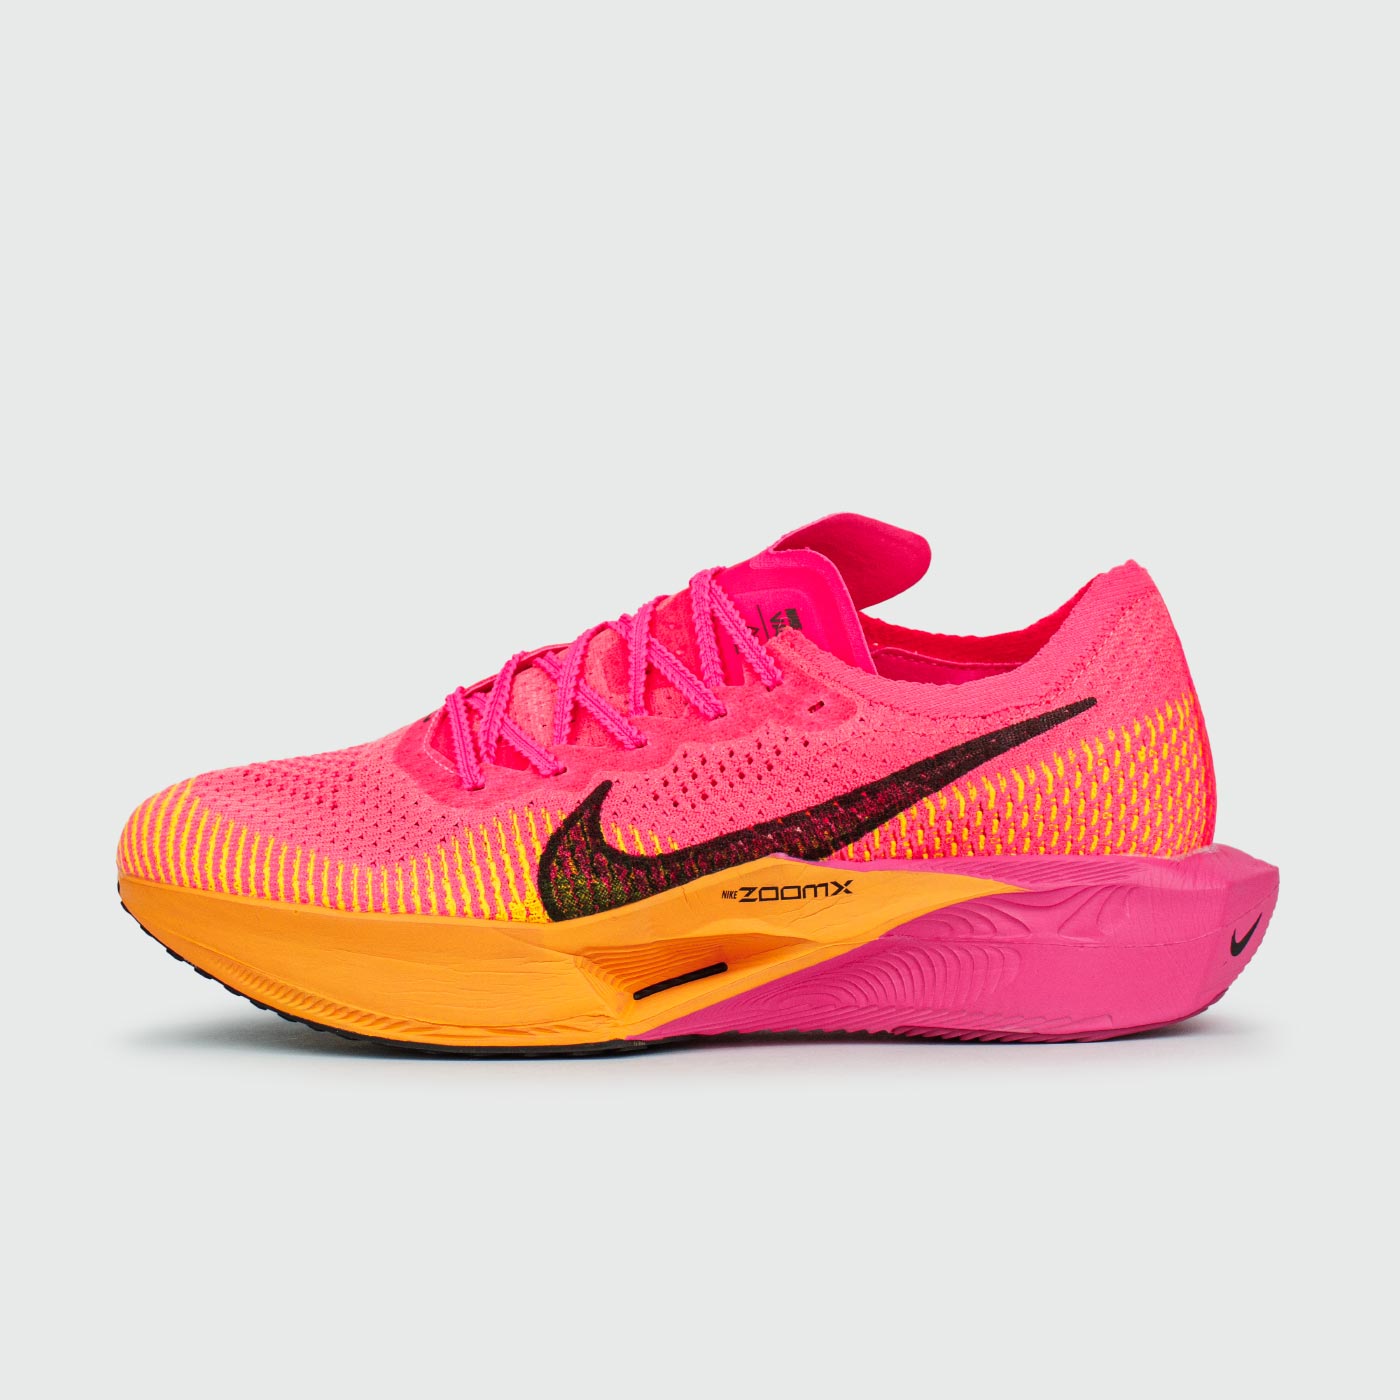 ZoomX Vaporfly Next 3-Pink